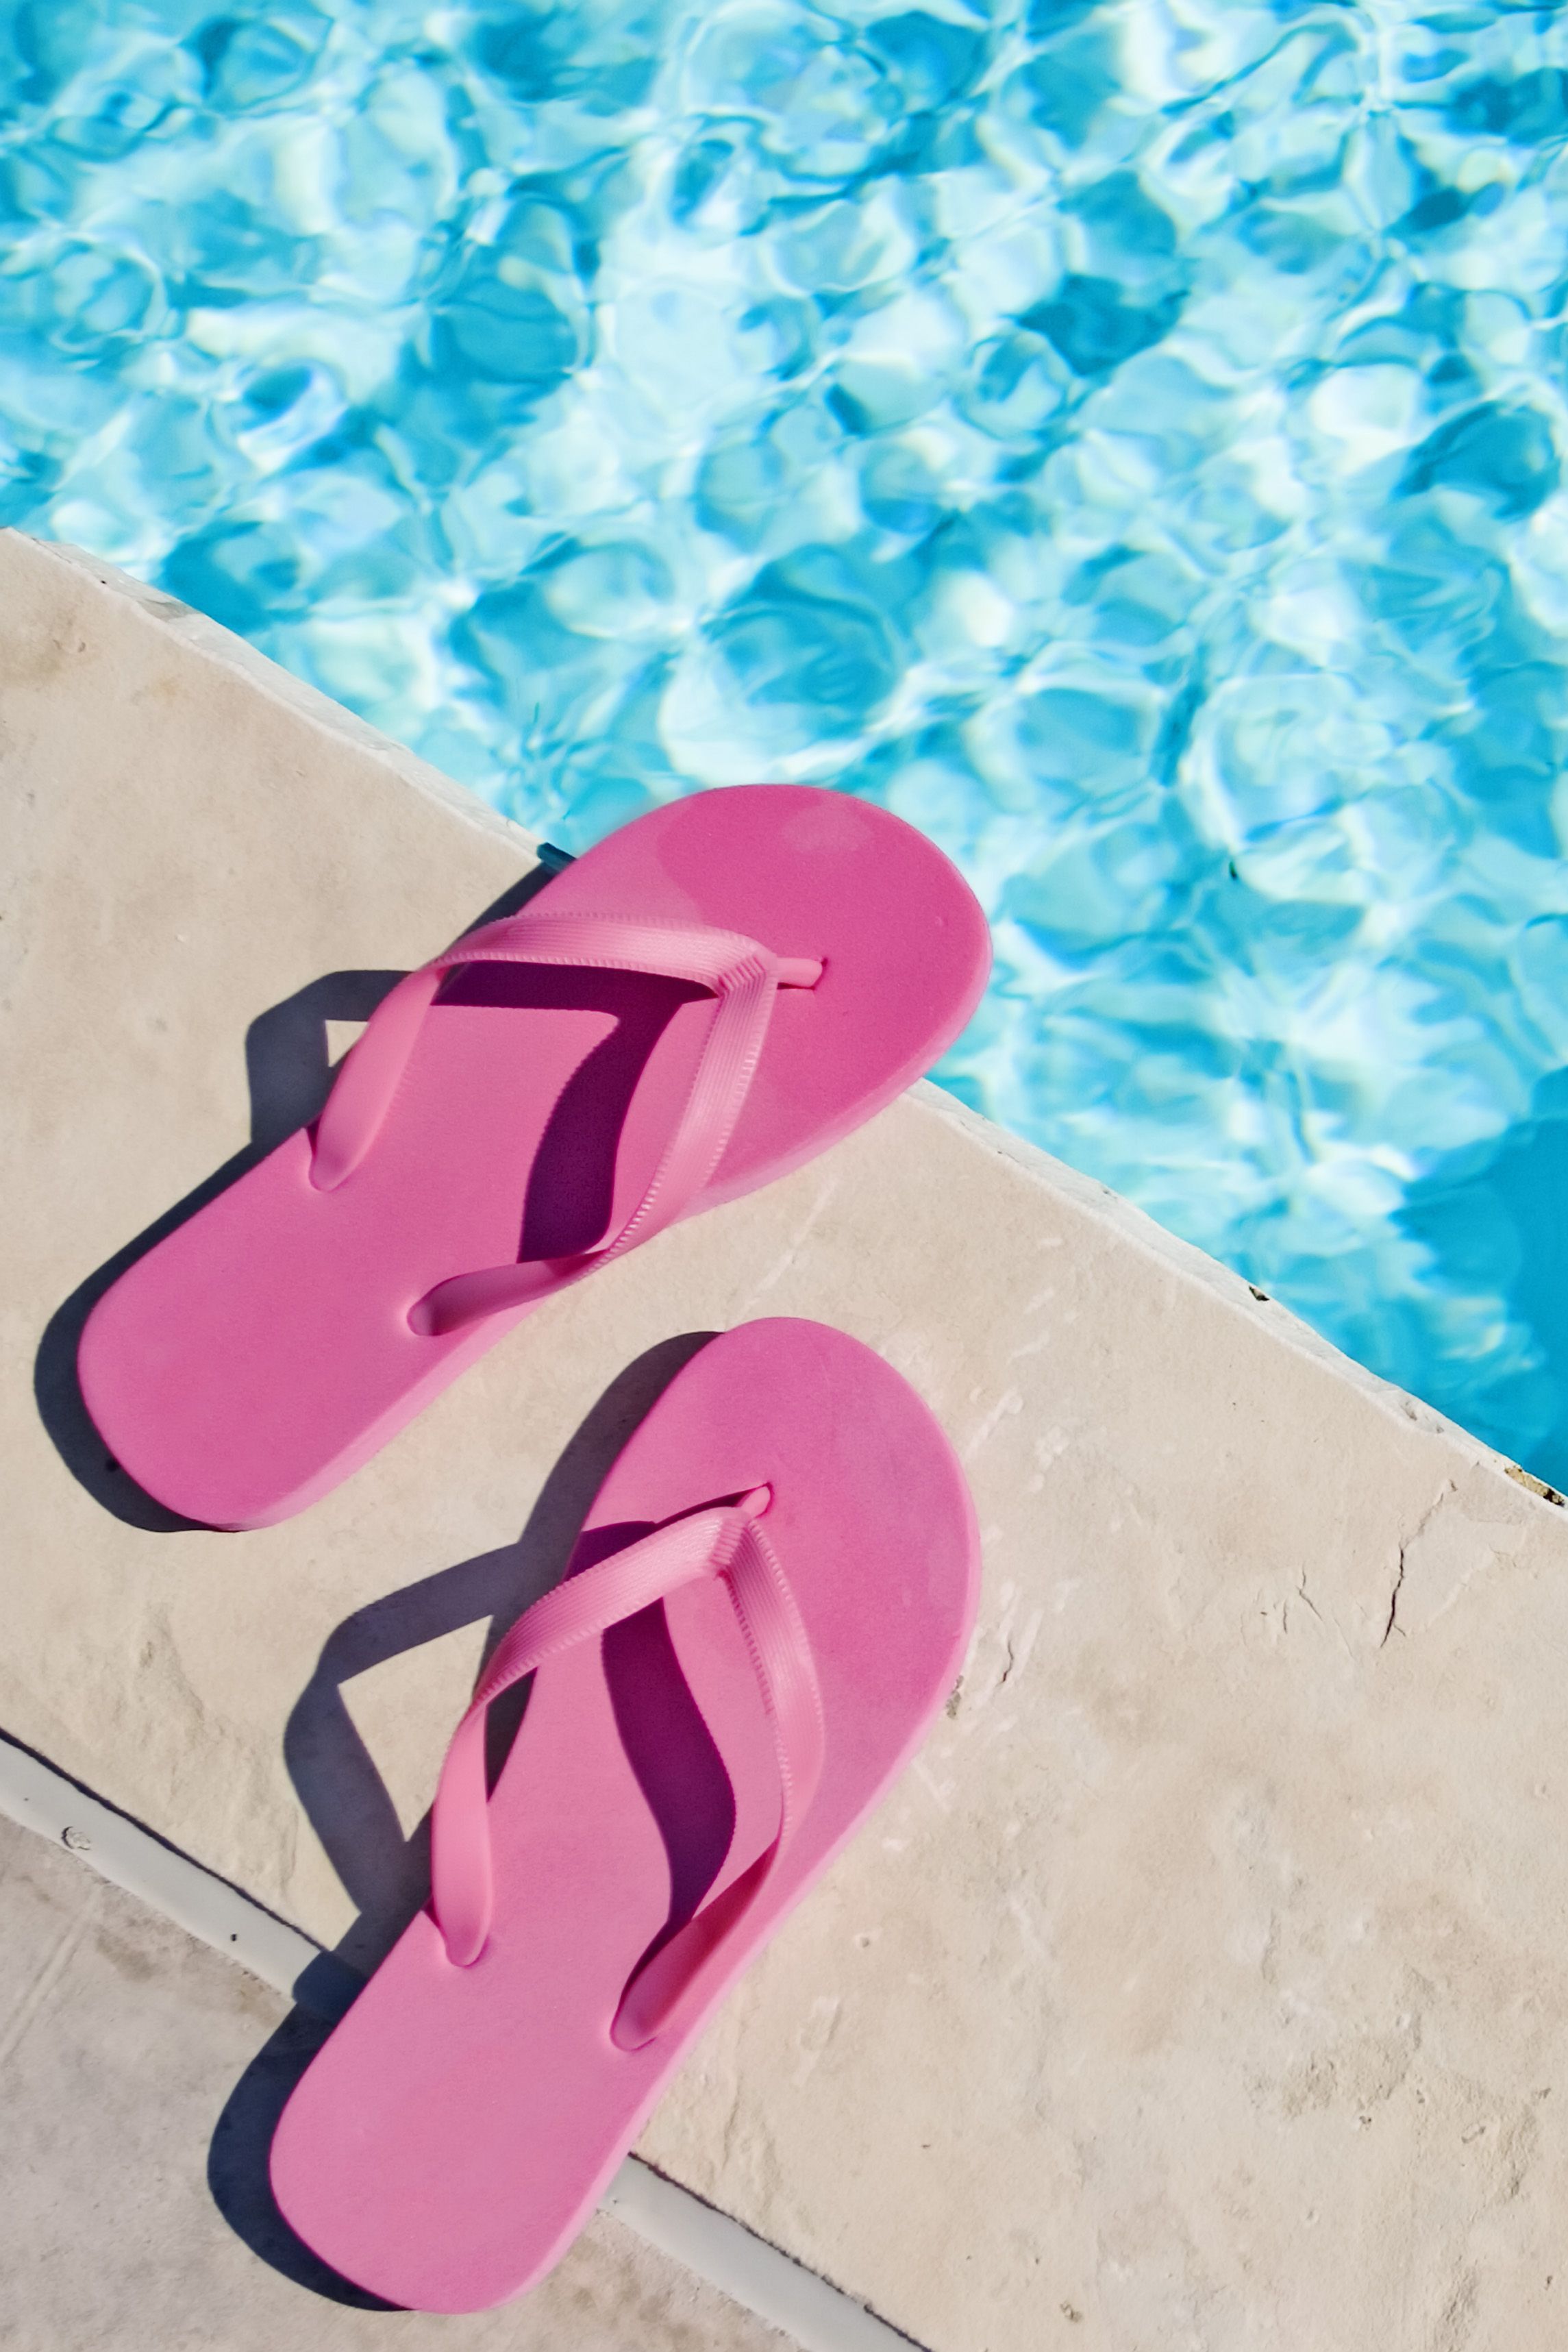 Flip-Flop Facts - Are Flip-Flops Bad for Your Feet?